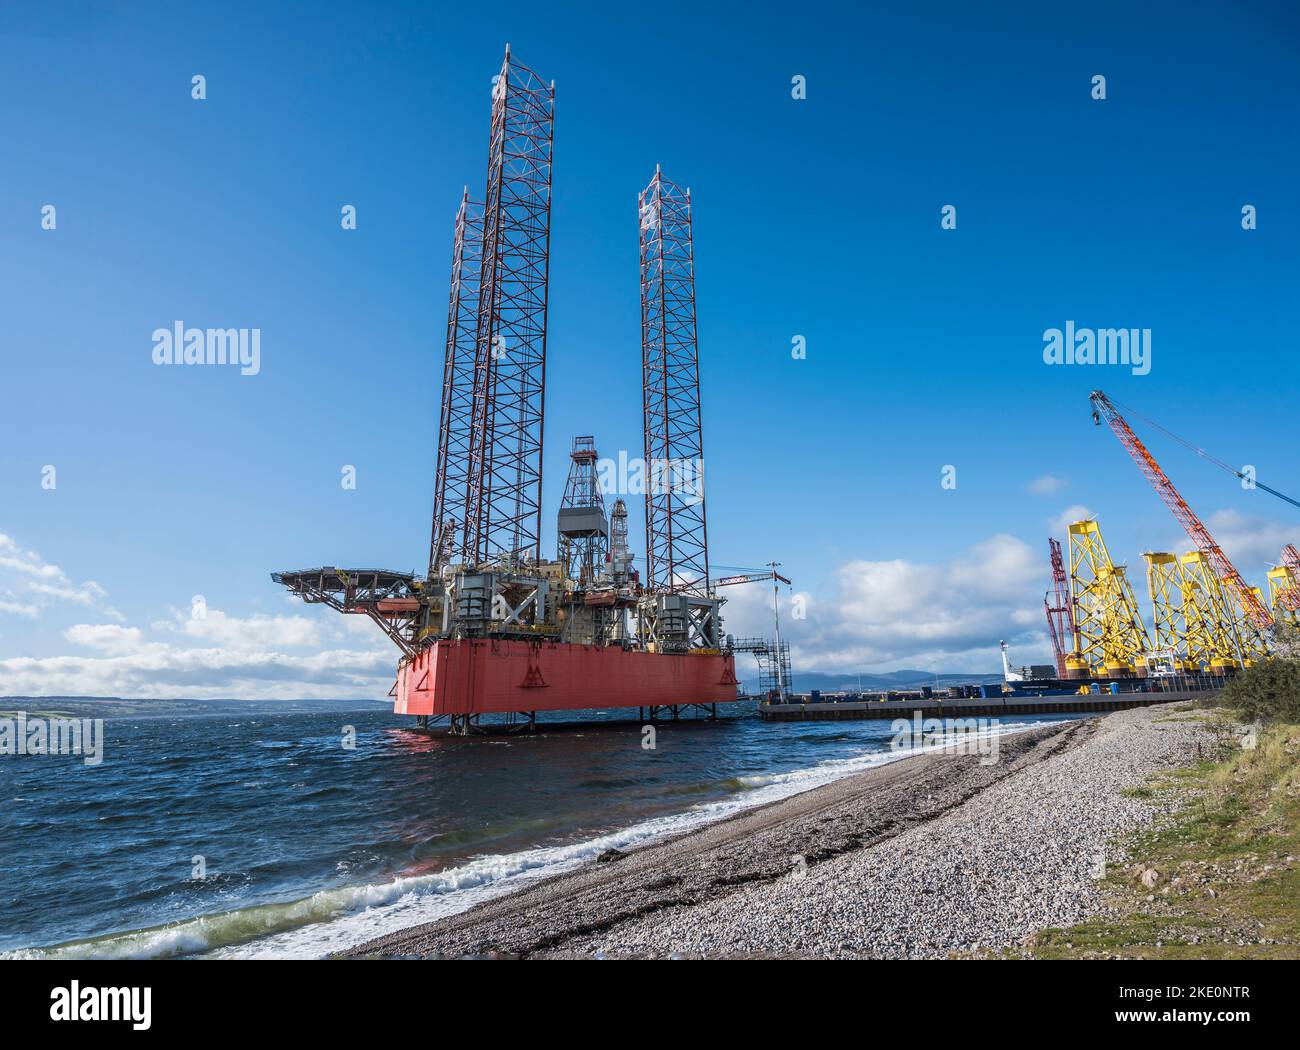 The image is of the gas exploration rig in the repair yard at Nigg Terminal at Nigg on the Nigg Peninsula in Caithness Stock Photo